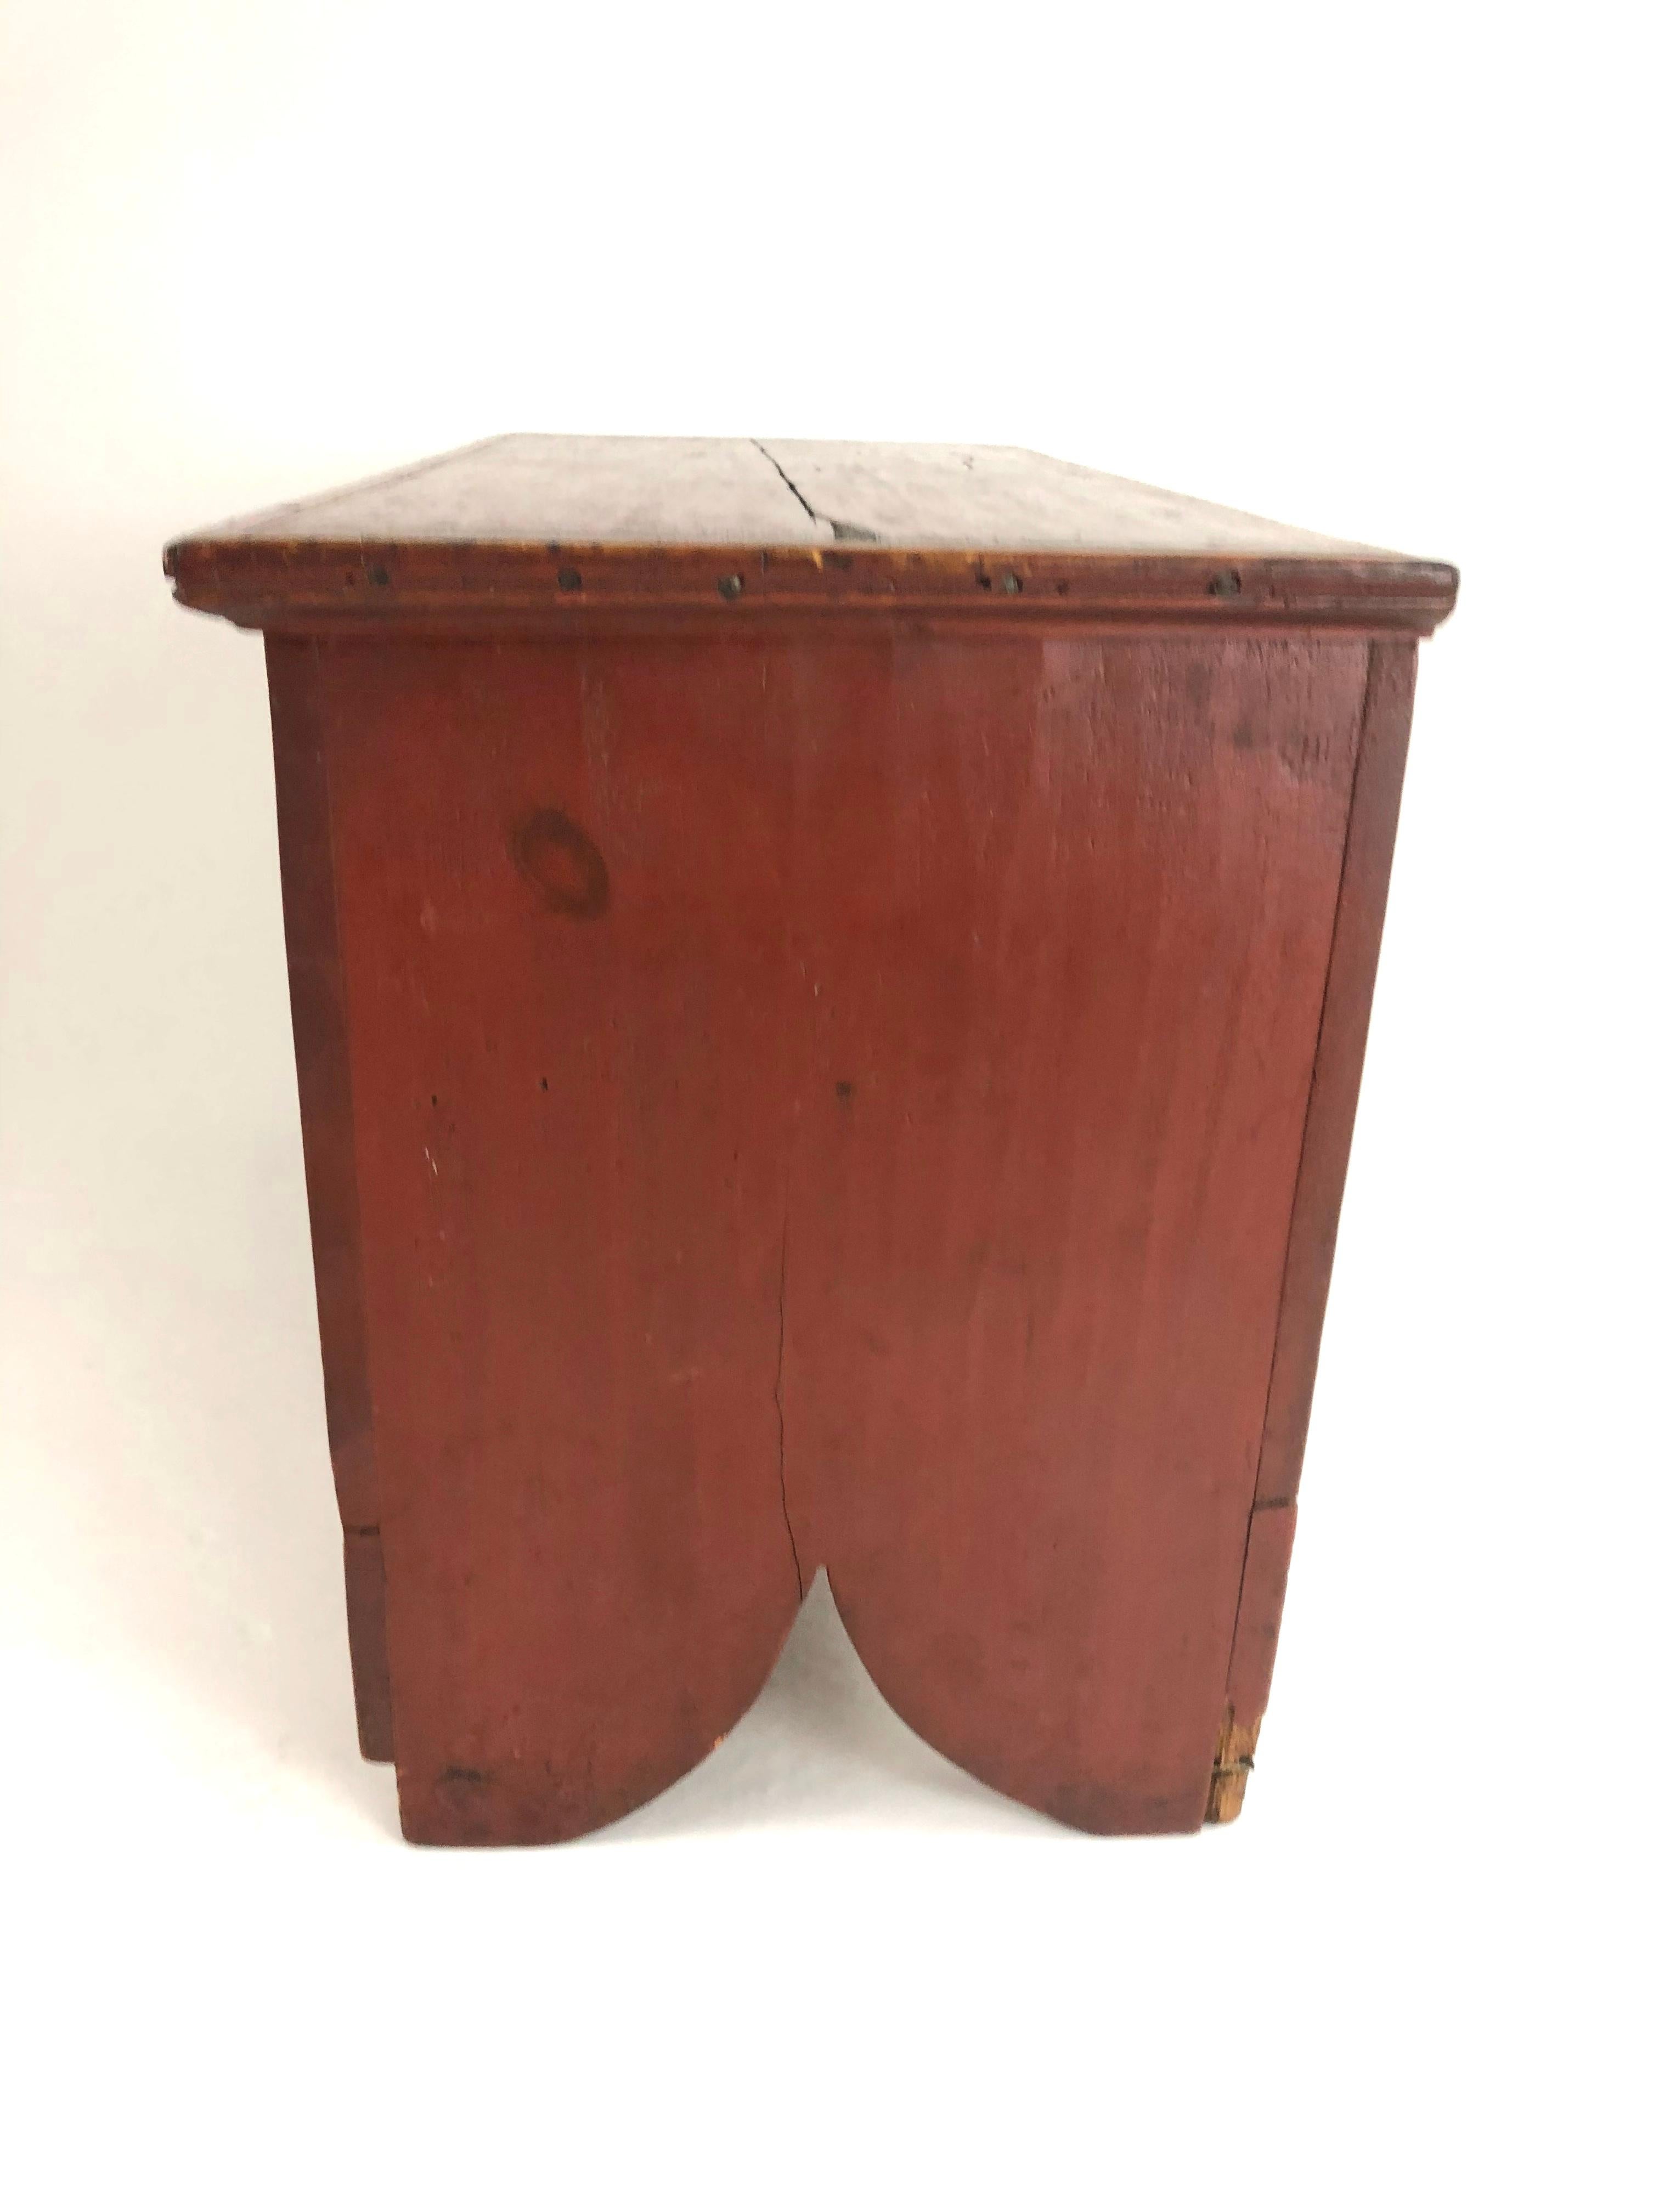 Hand-Carved Small 19th Century American Red Painted Blanket Chest